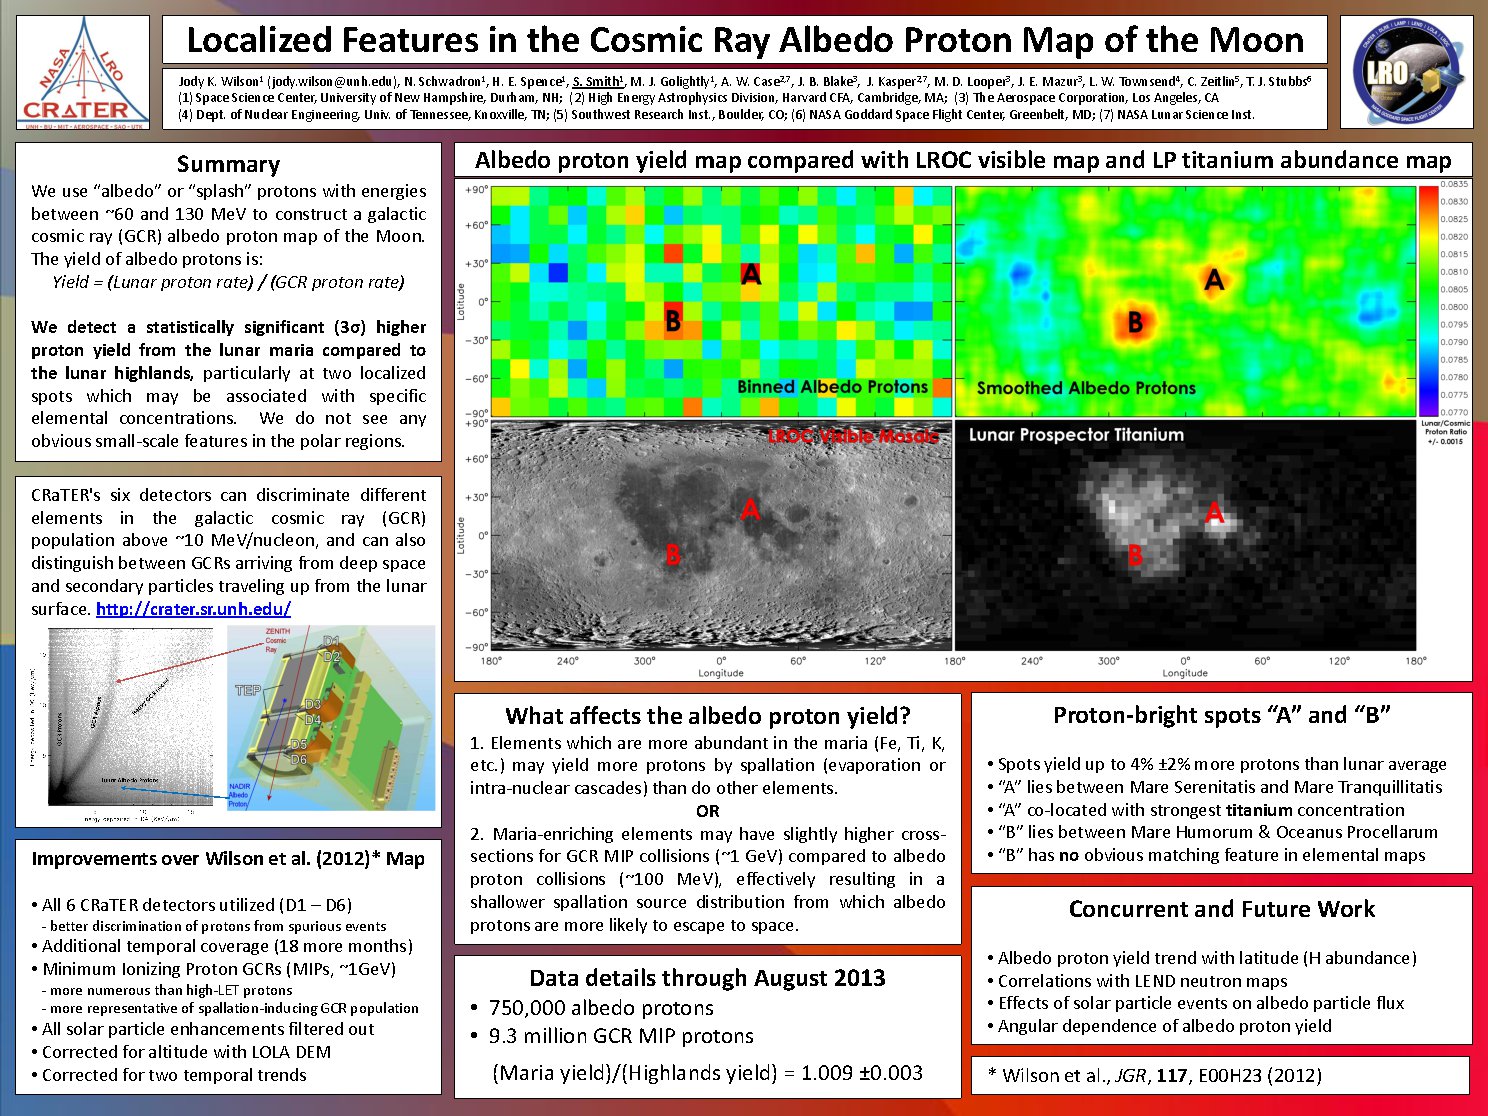 Localized Features In The Cosmic Ray Albedo Proton Map Of The Moon by jkwilson